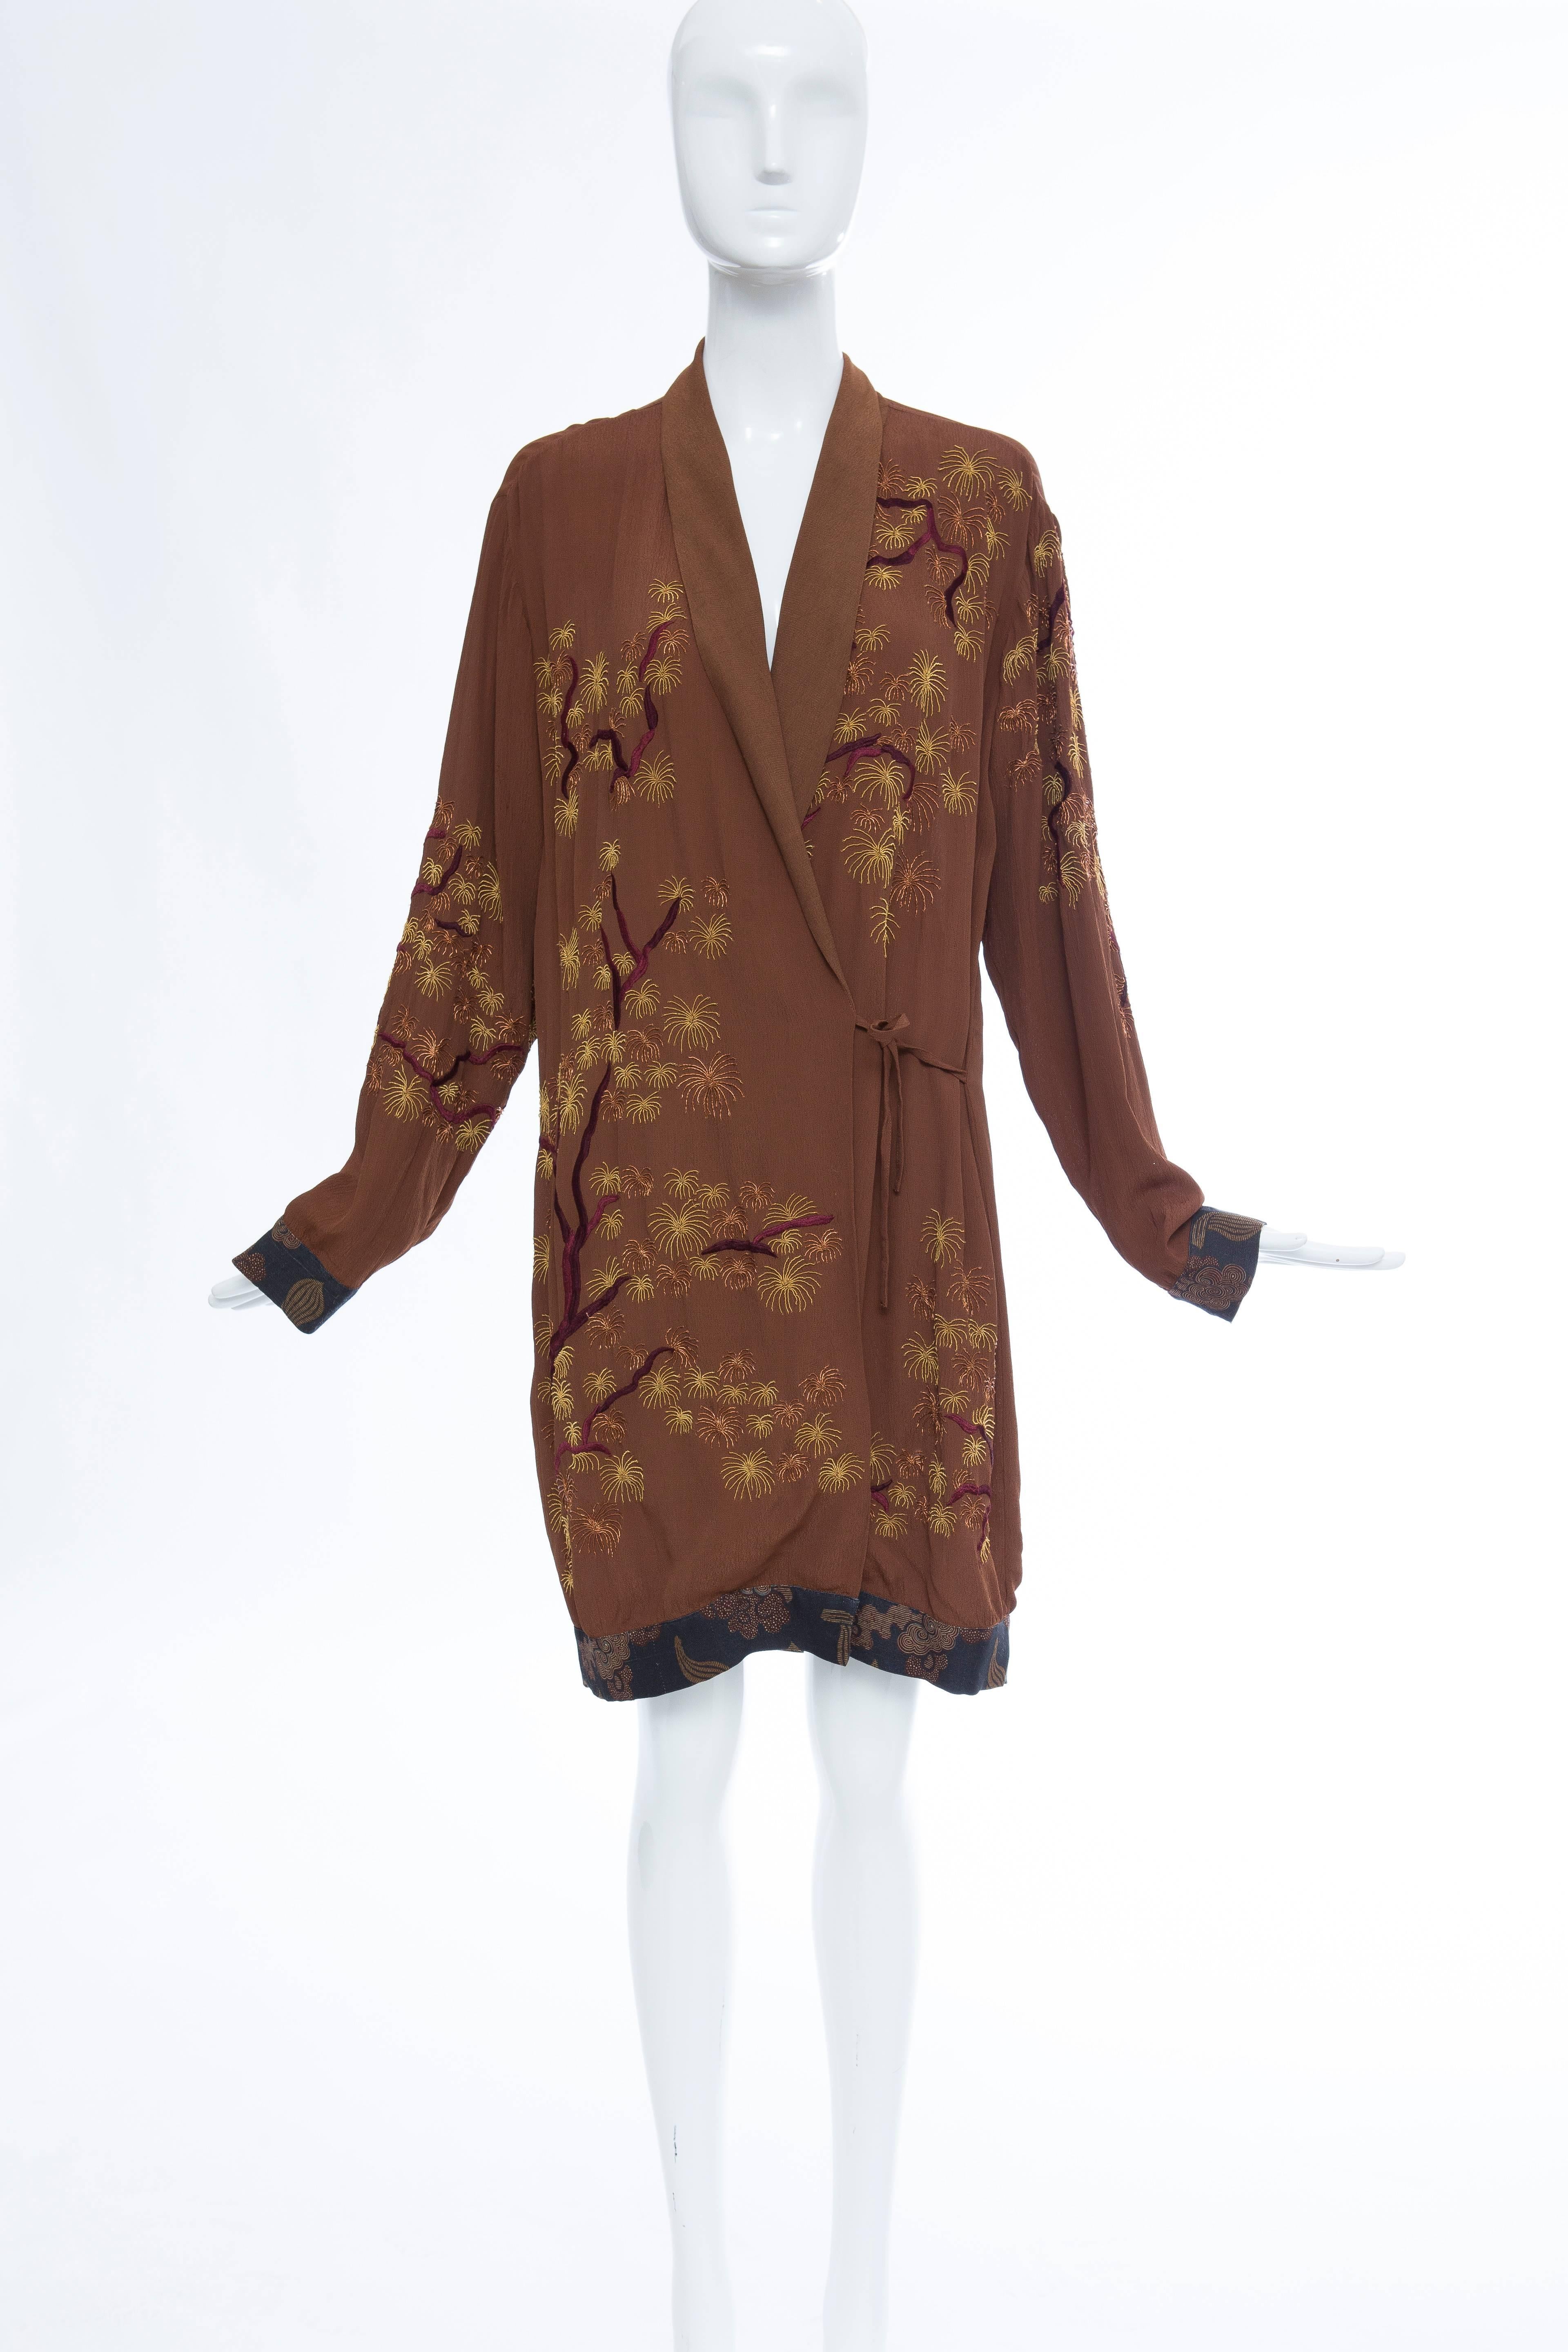 Dries Van Noten embroidered kimono jacket with printed cuffs and hem and self tie closures at waist.

XS

Bust: 40, Waist 37, Length: 37
